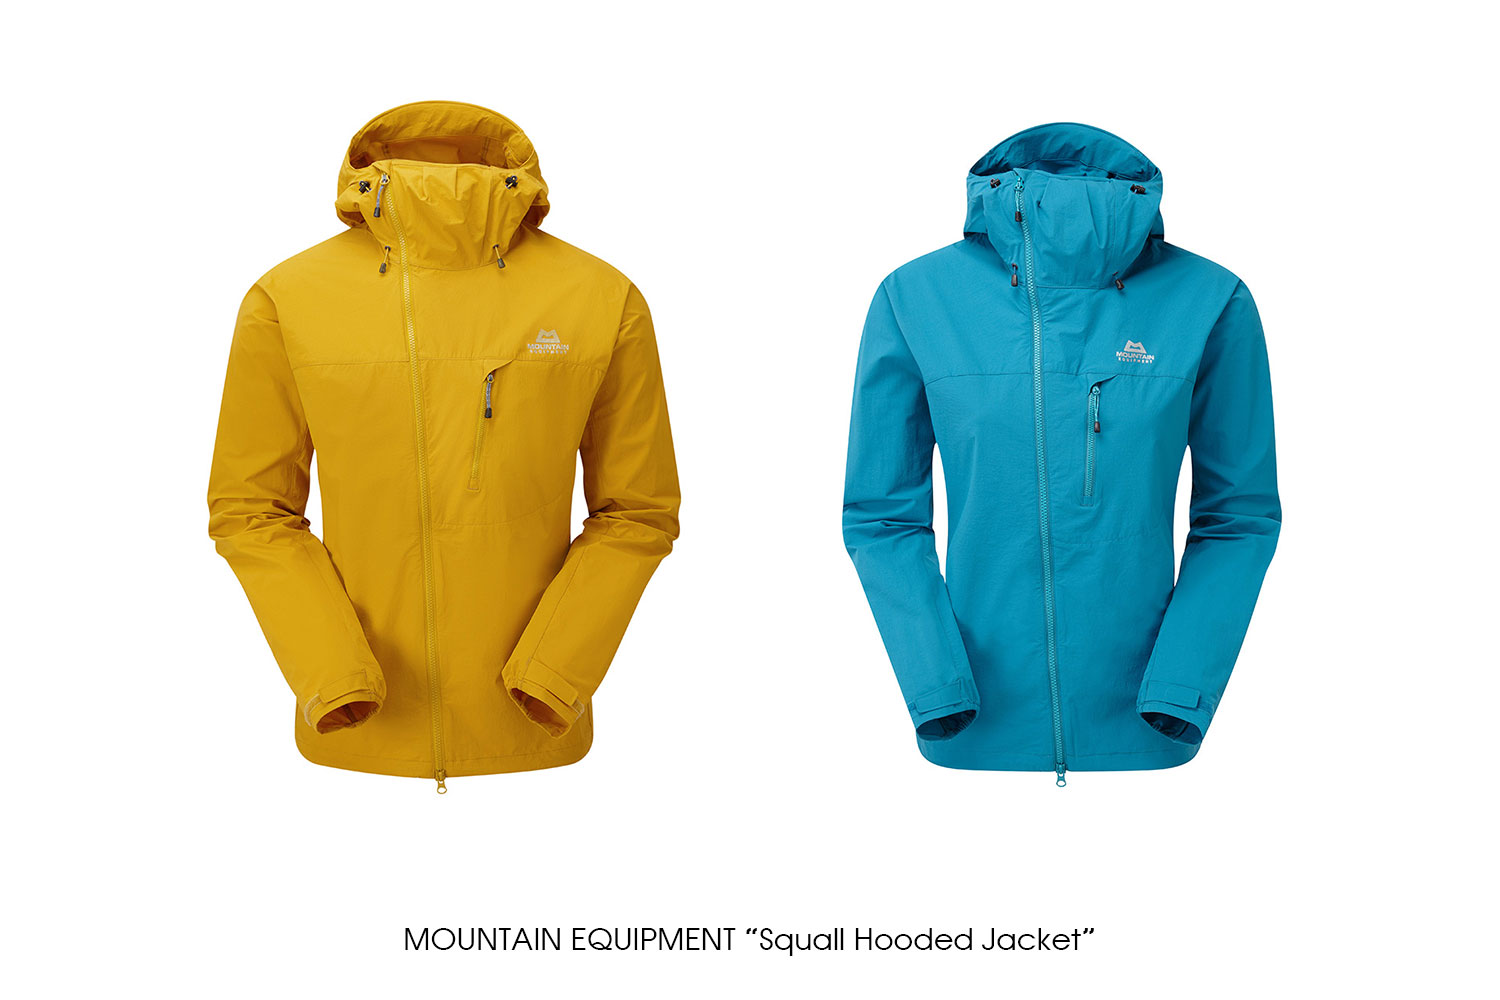 MOUNTAIN EQUIPMENT "Squall Hooded Jacket"